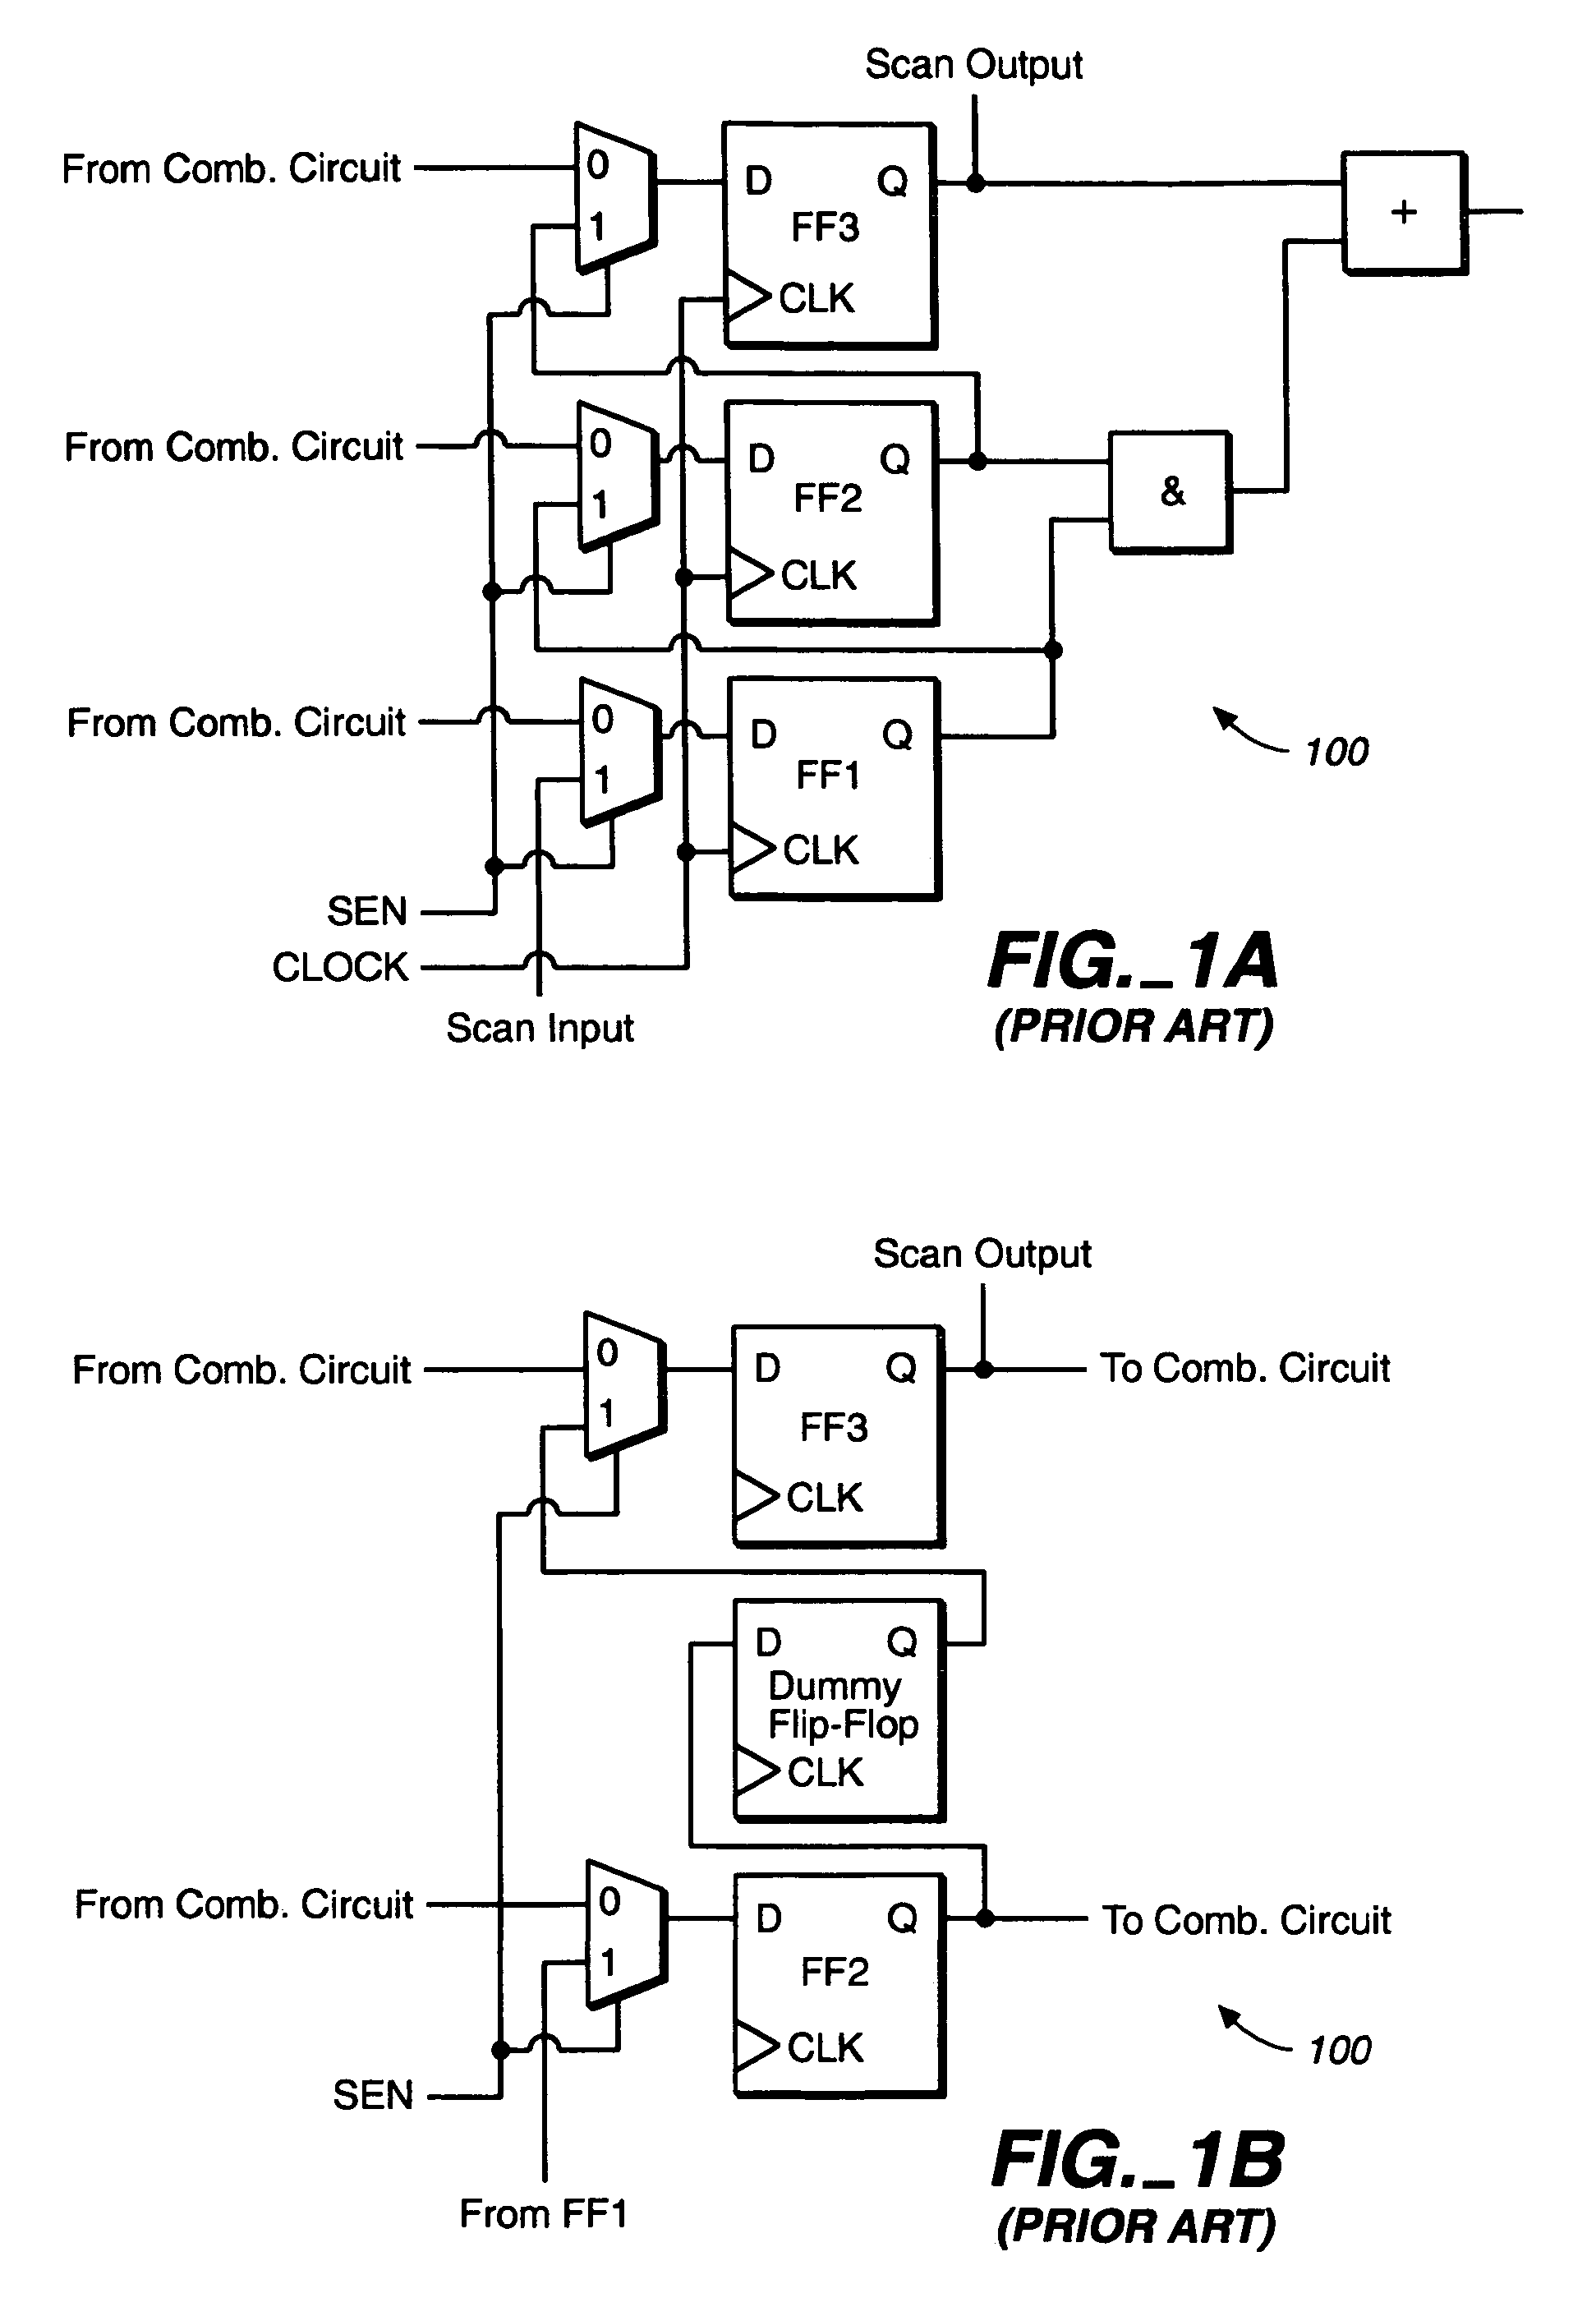 System and method for improving transition delay fault coverage in delay fault tests through use of an enhanced scan flip-flop